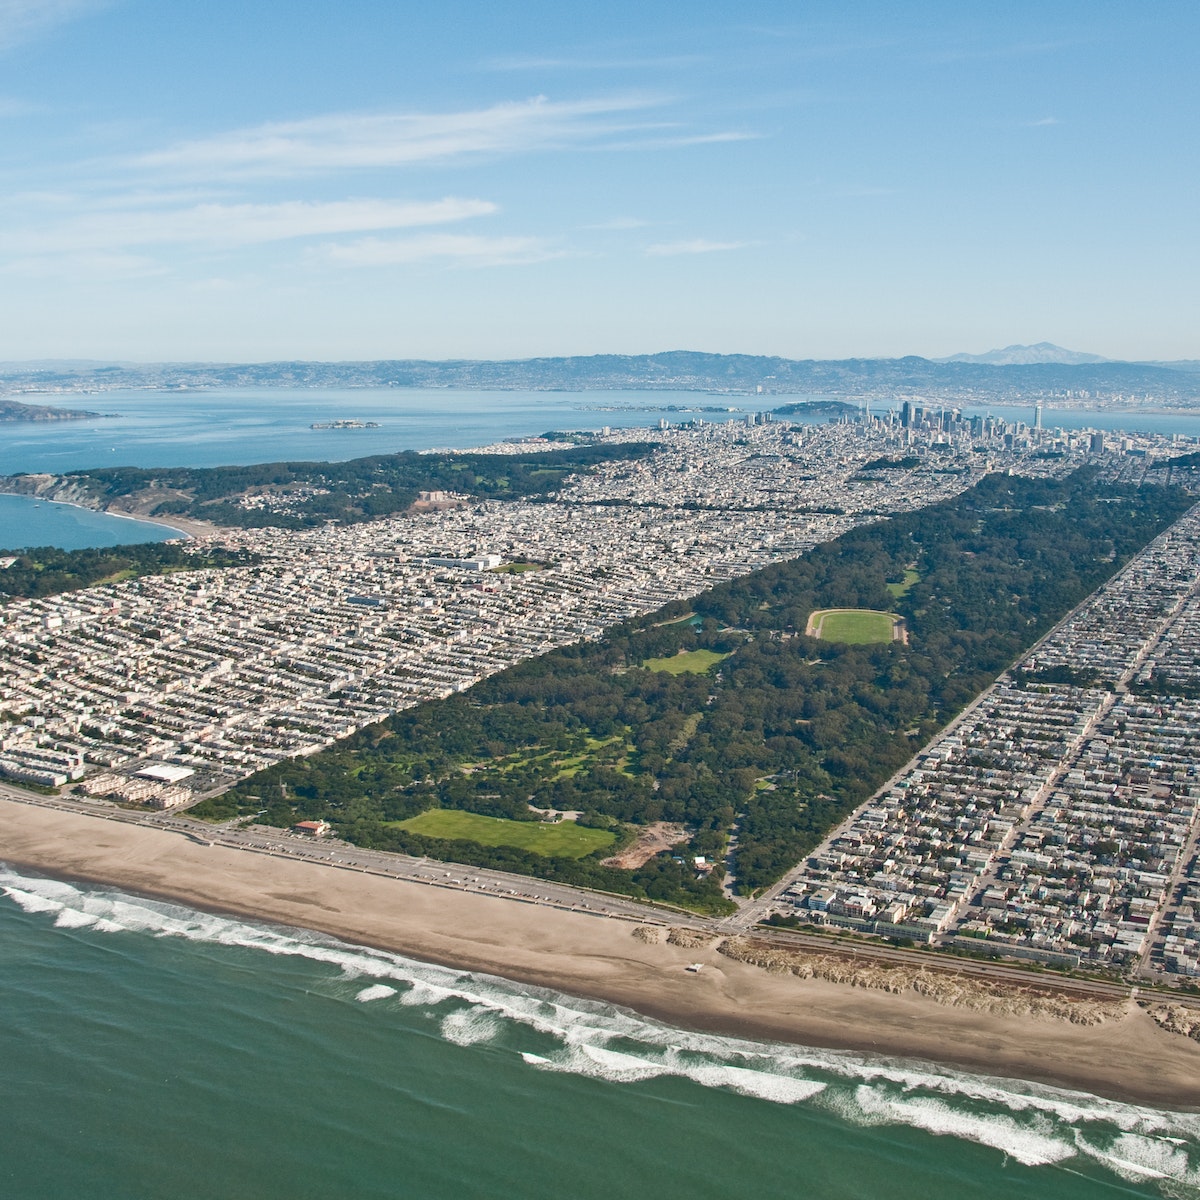 An aerial view of Golden Gate Park from the Pacific Ocean. Golden Gate Park is the third most visited city park in the US.